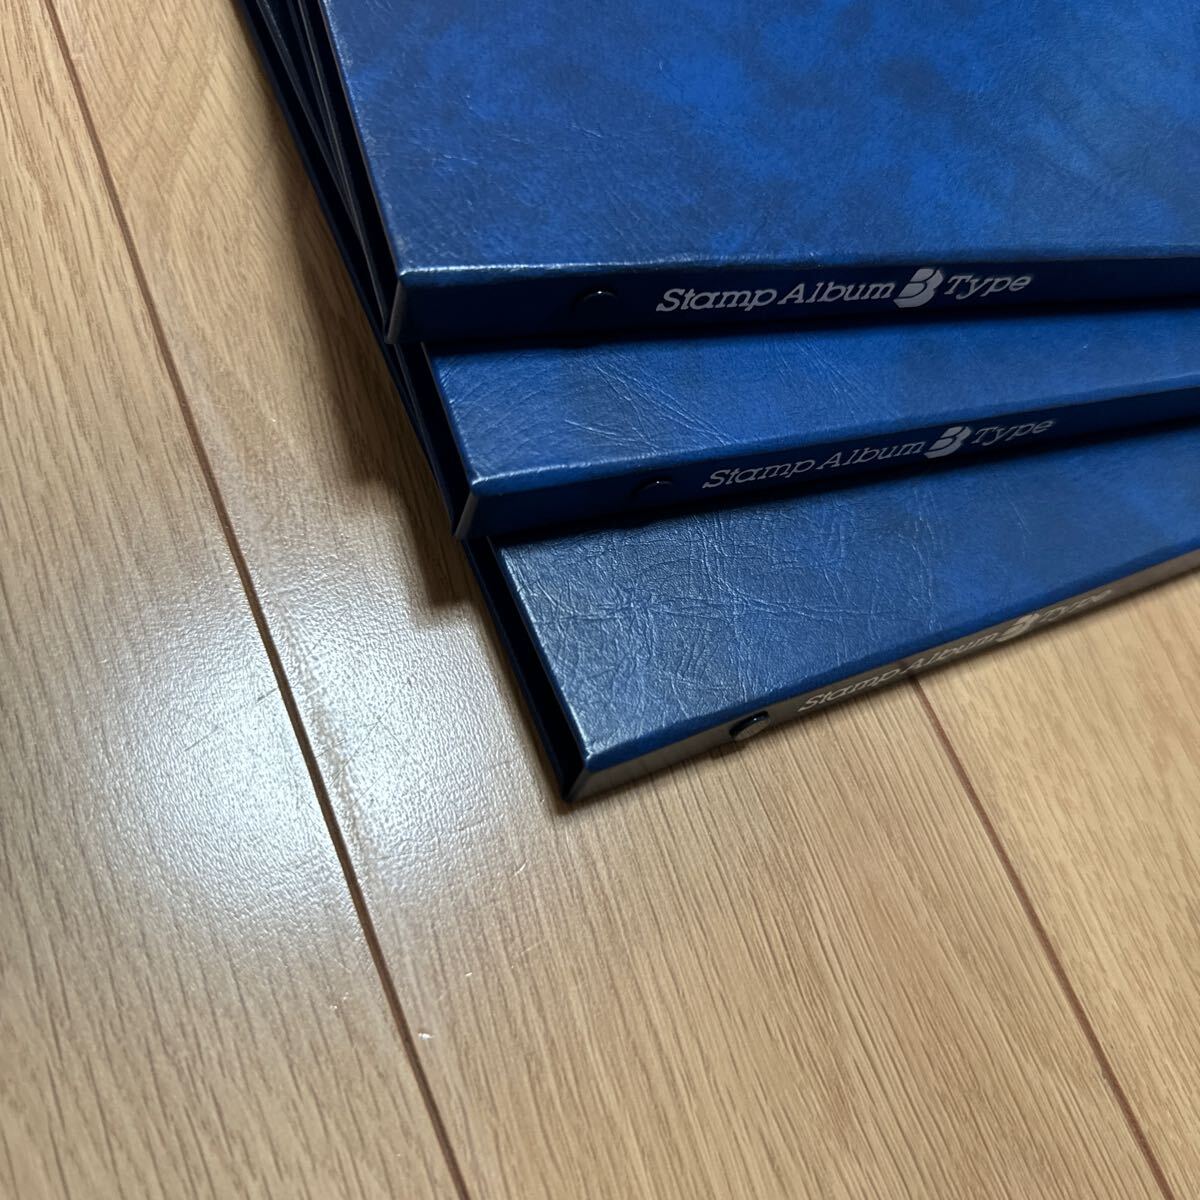  stock book Stamp Album BTypete-ji-SB-30 stamp album blue 3 pcs. summarize case attaching length some 26.8cm width some 20cm cardboard 8 sheets 16 page 6 step 